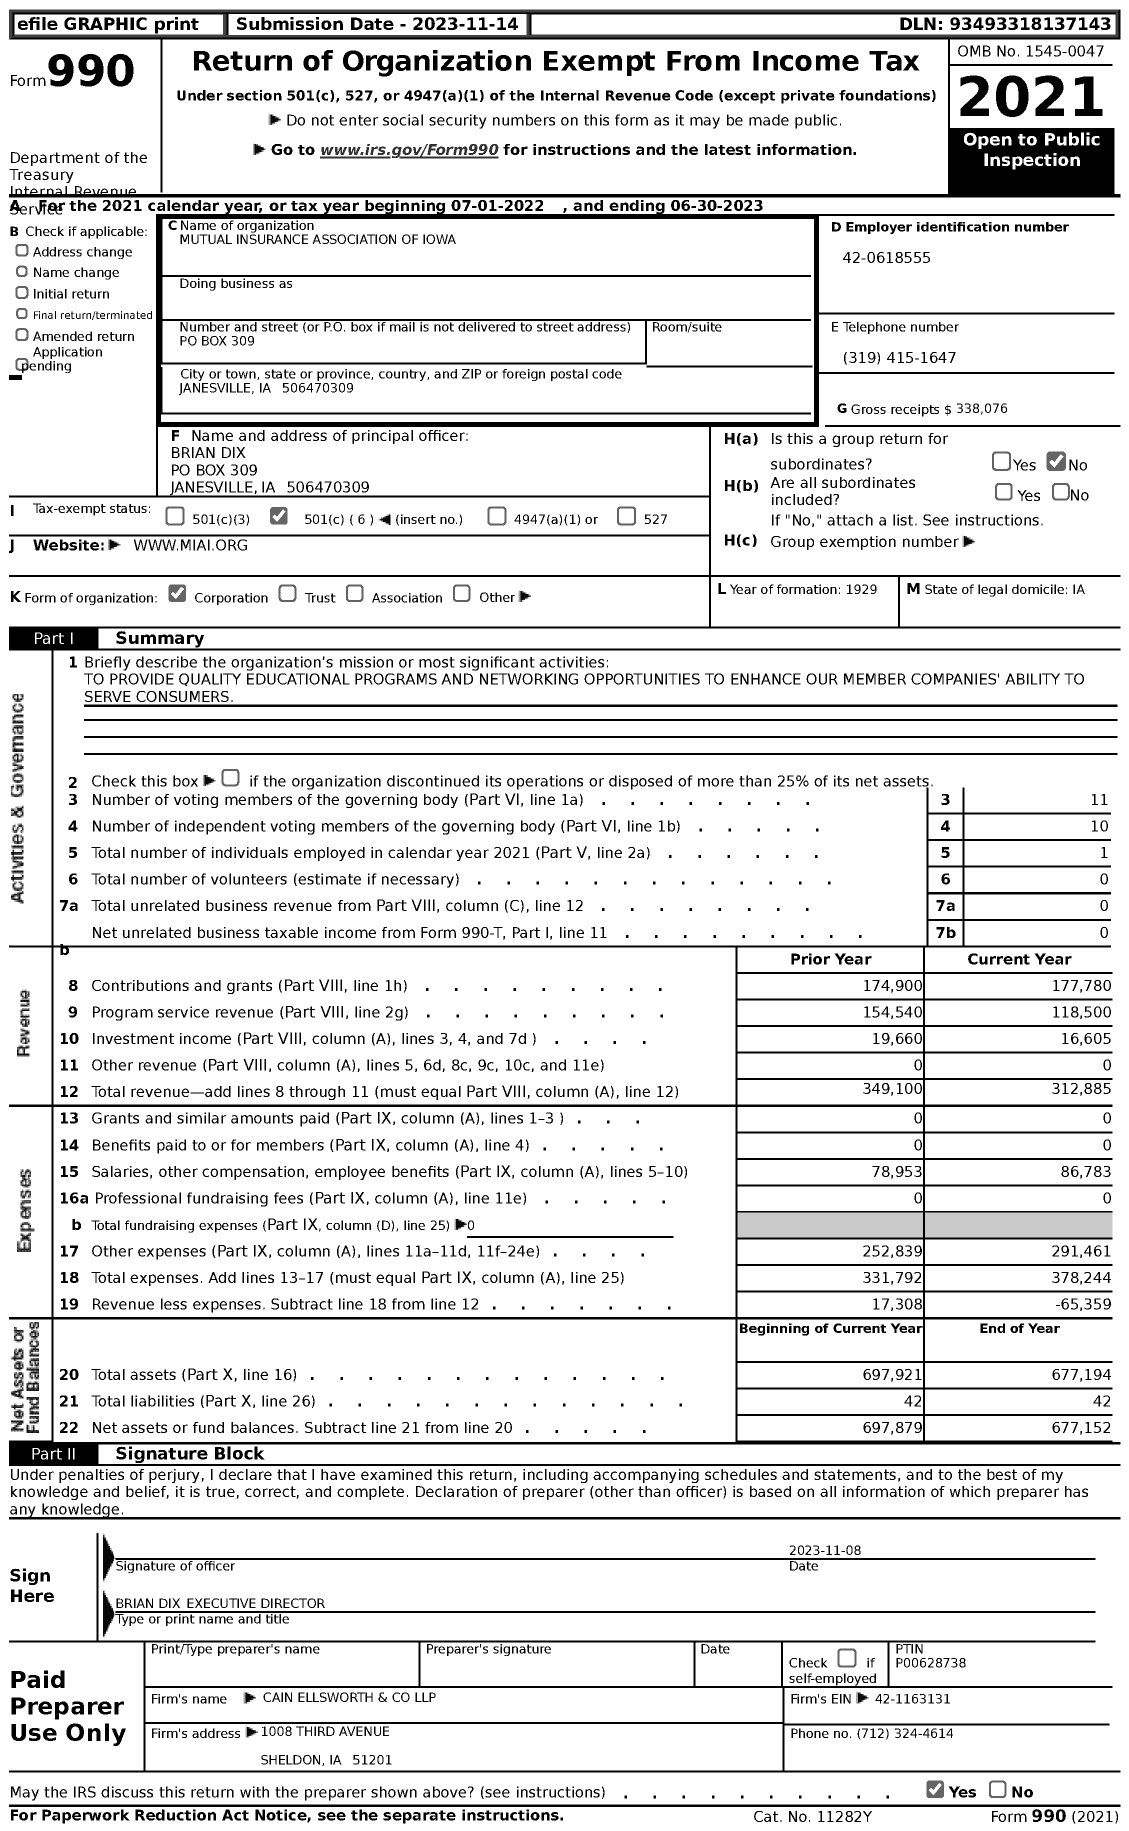 Image of first page of 2022 Form 990 for Mutual Insurance Association of Iowa